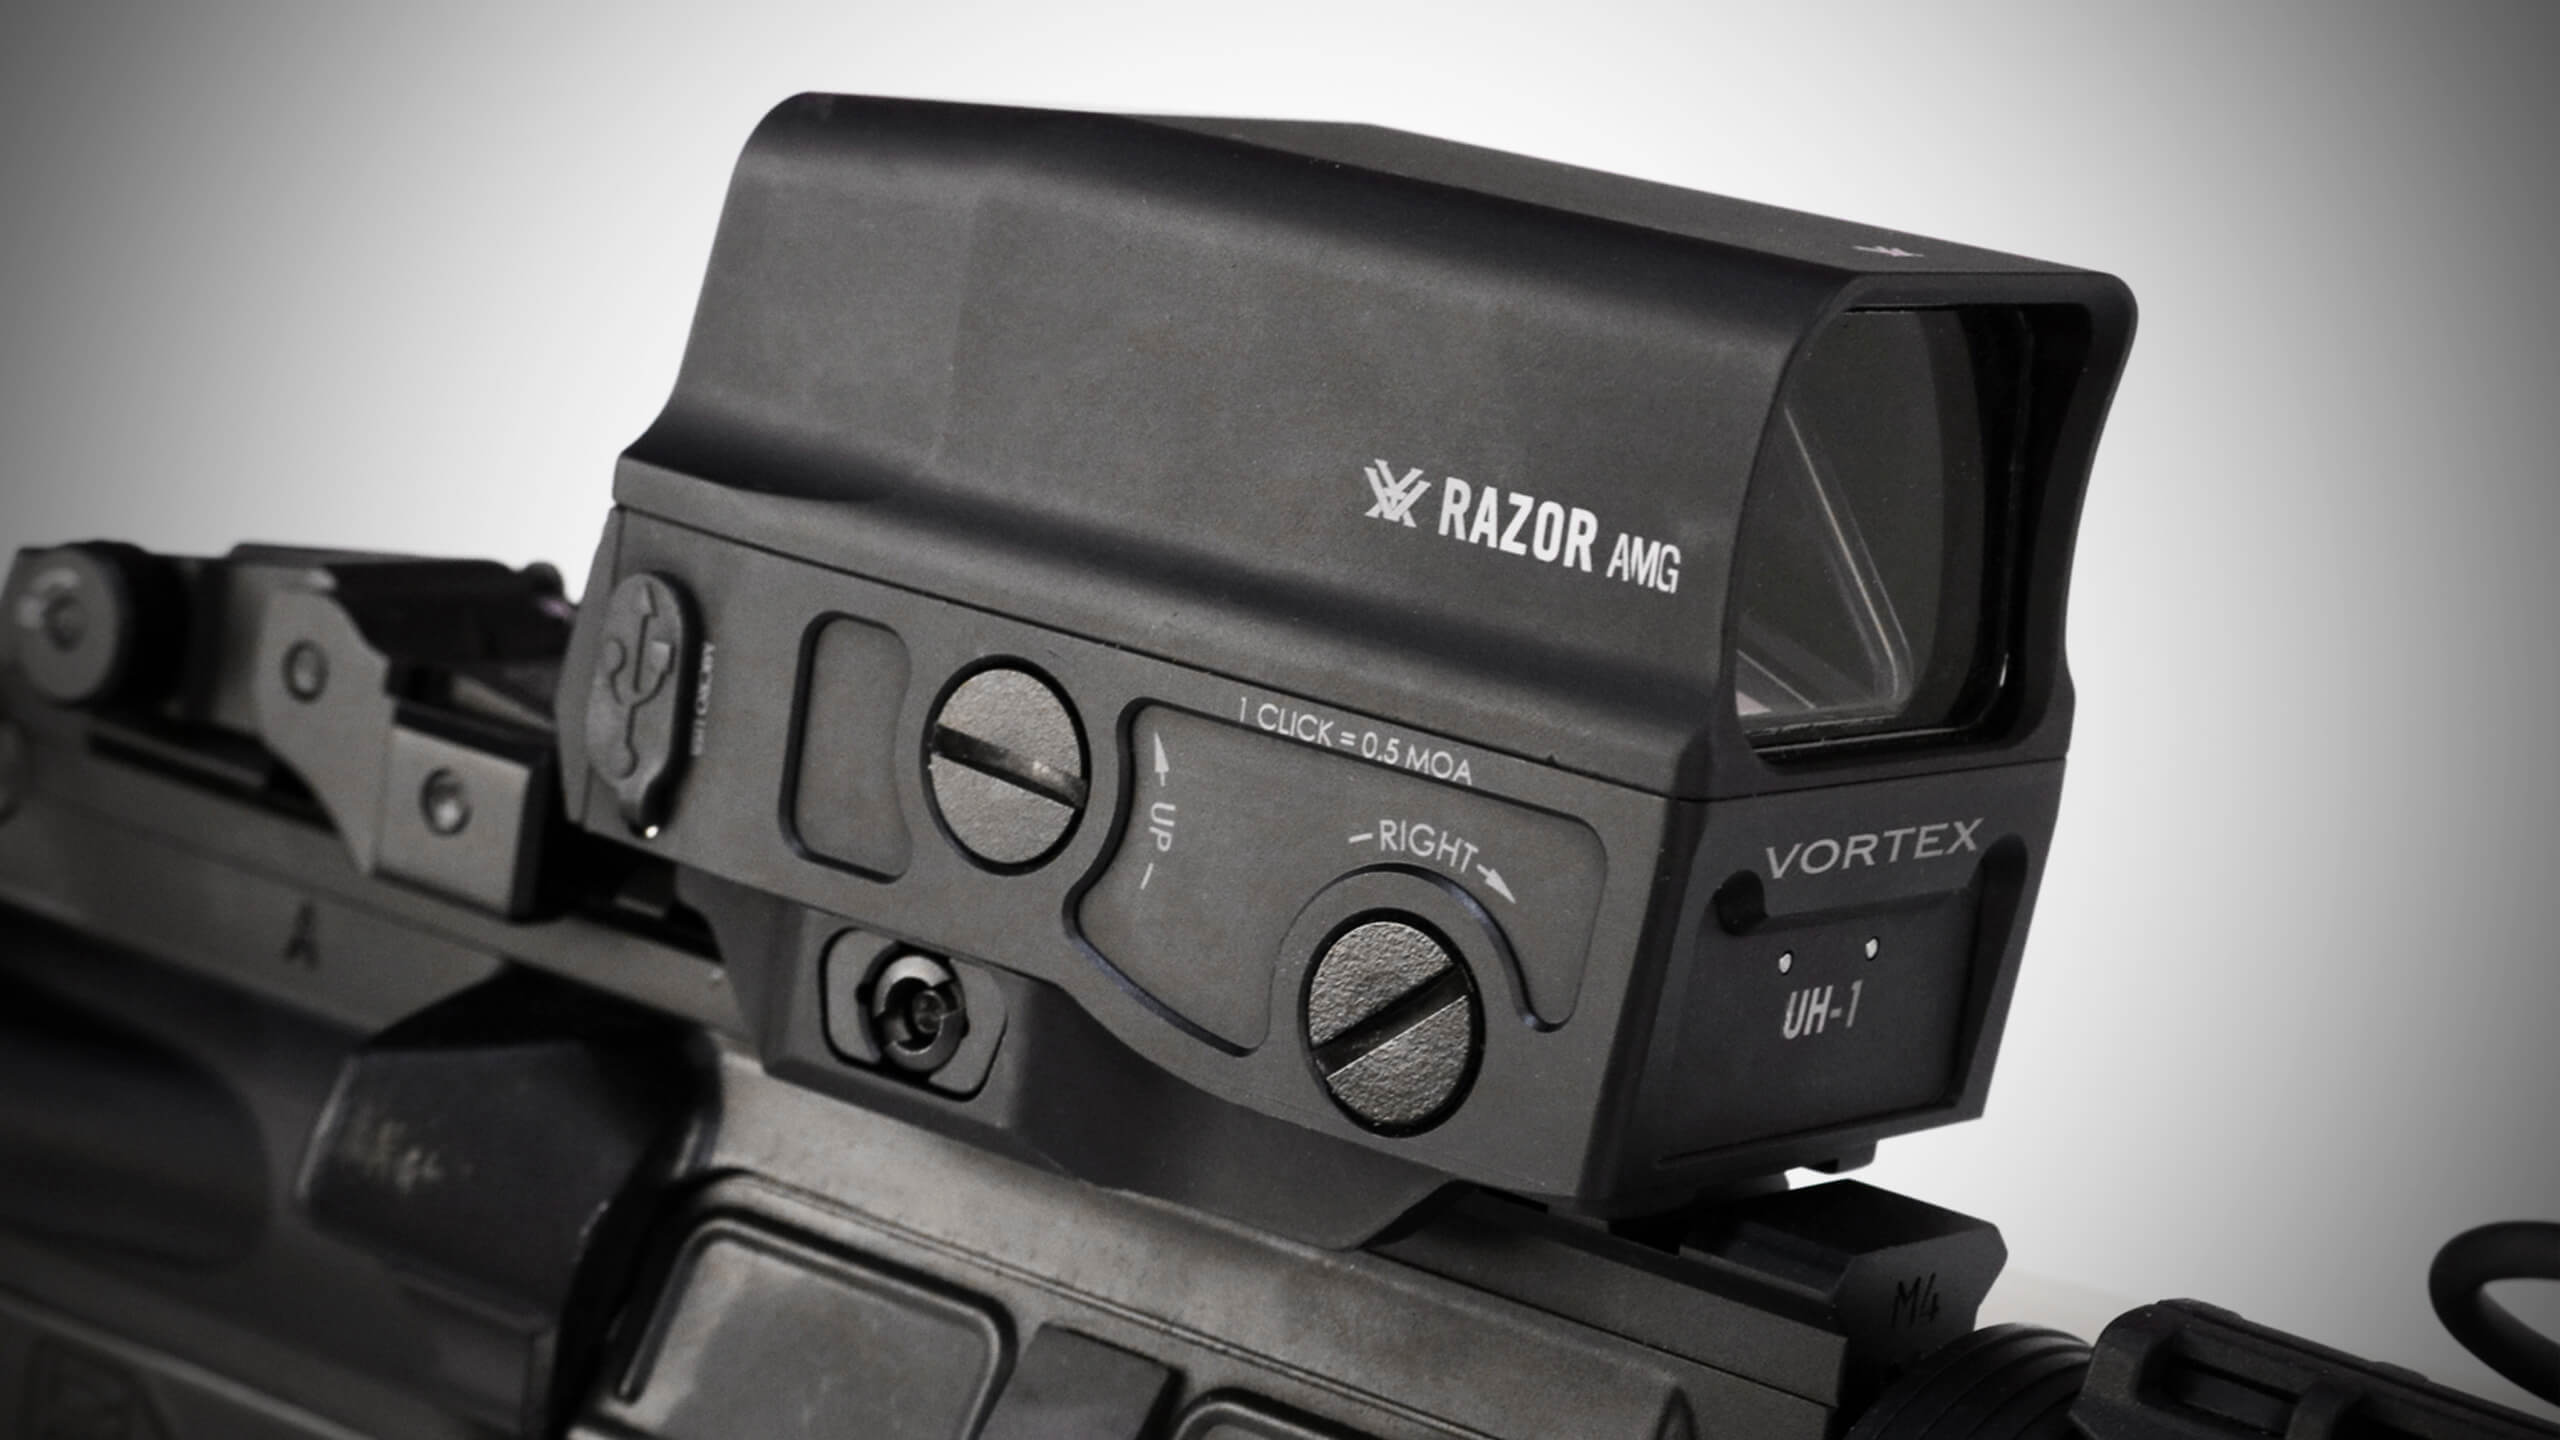 Review: Vortex AMG UH-1 Holographic Weapon Sight - The Armory Life